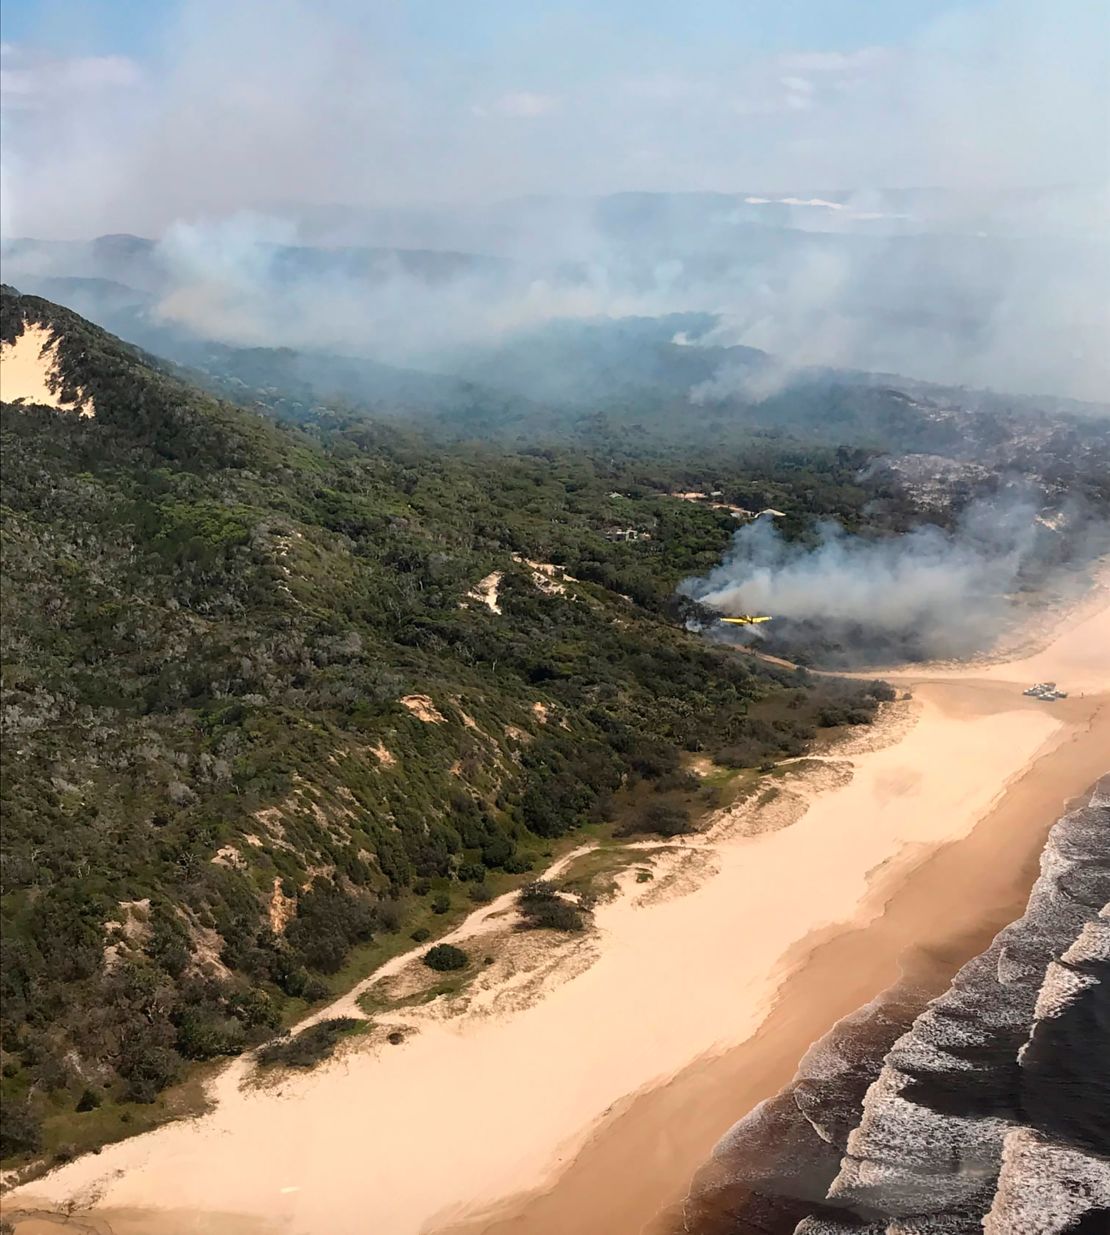 Smoke blows over hills and toward the ocean at Fraser Island, on Australia's east coast, where a fire has raged for six weeks.